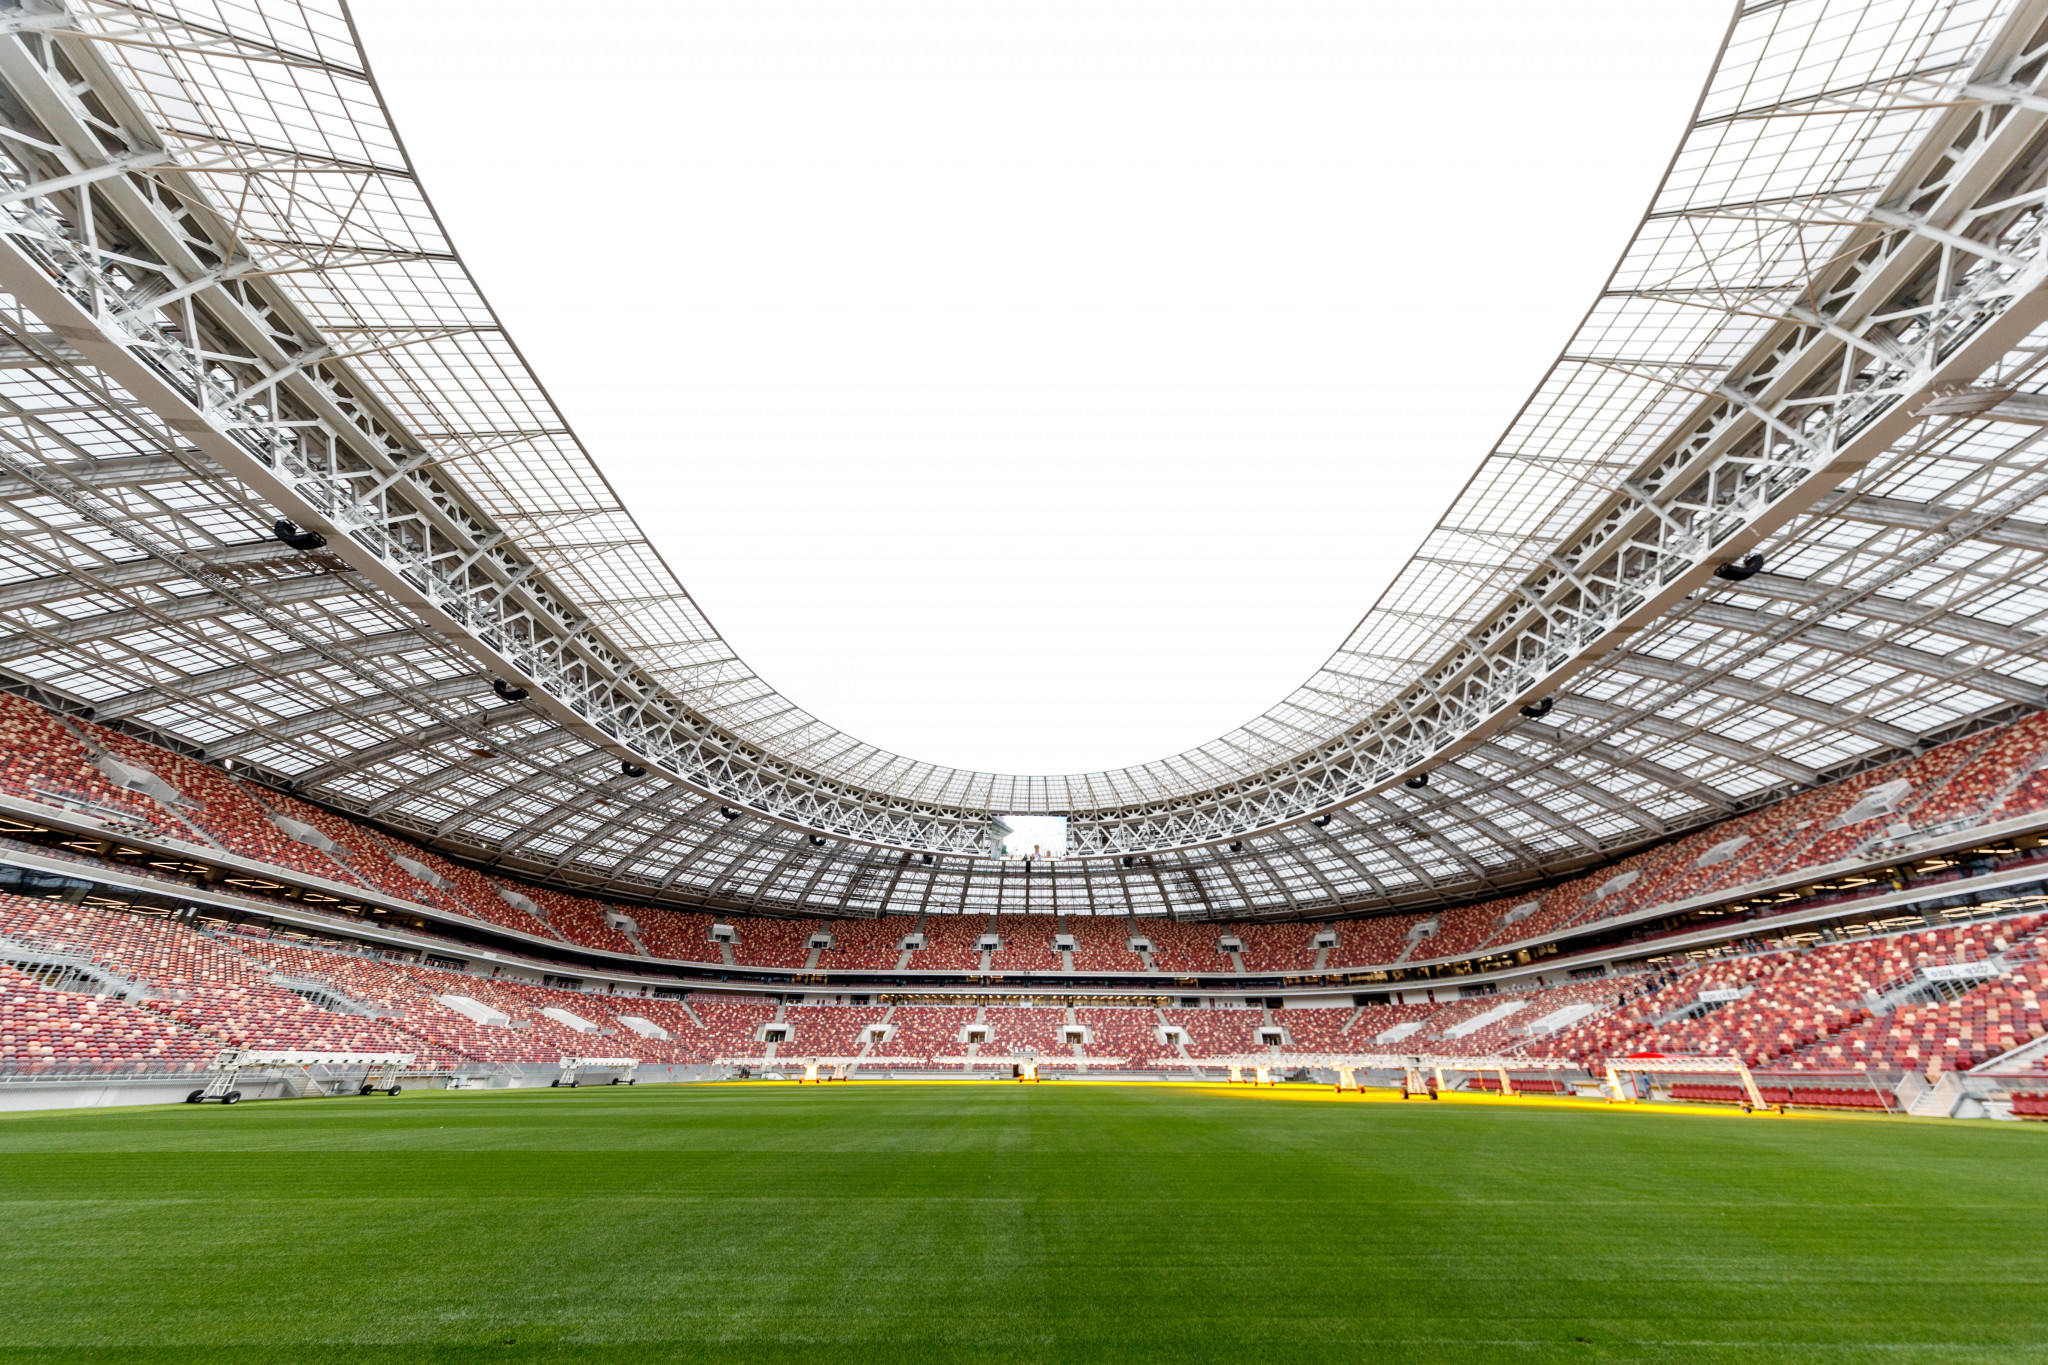 More than 50,000 tickets have been requested for the final, which will take place at the Luzhniki Stadium ©Getty Images